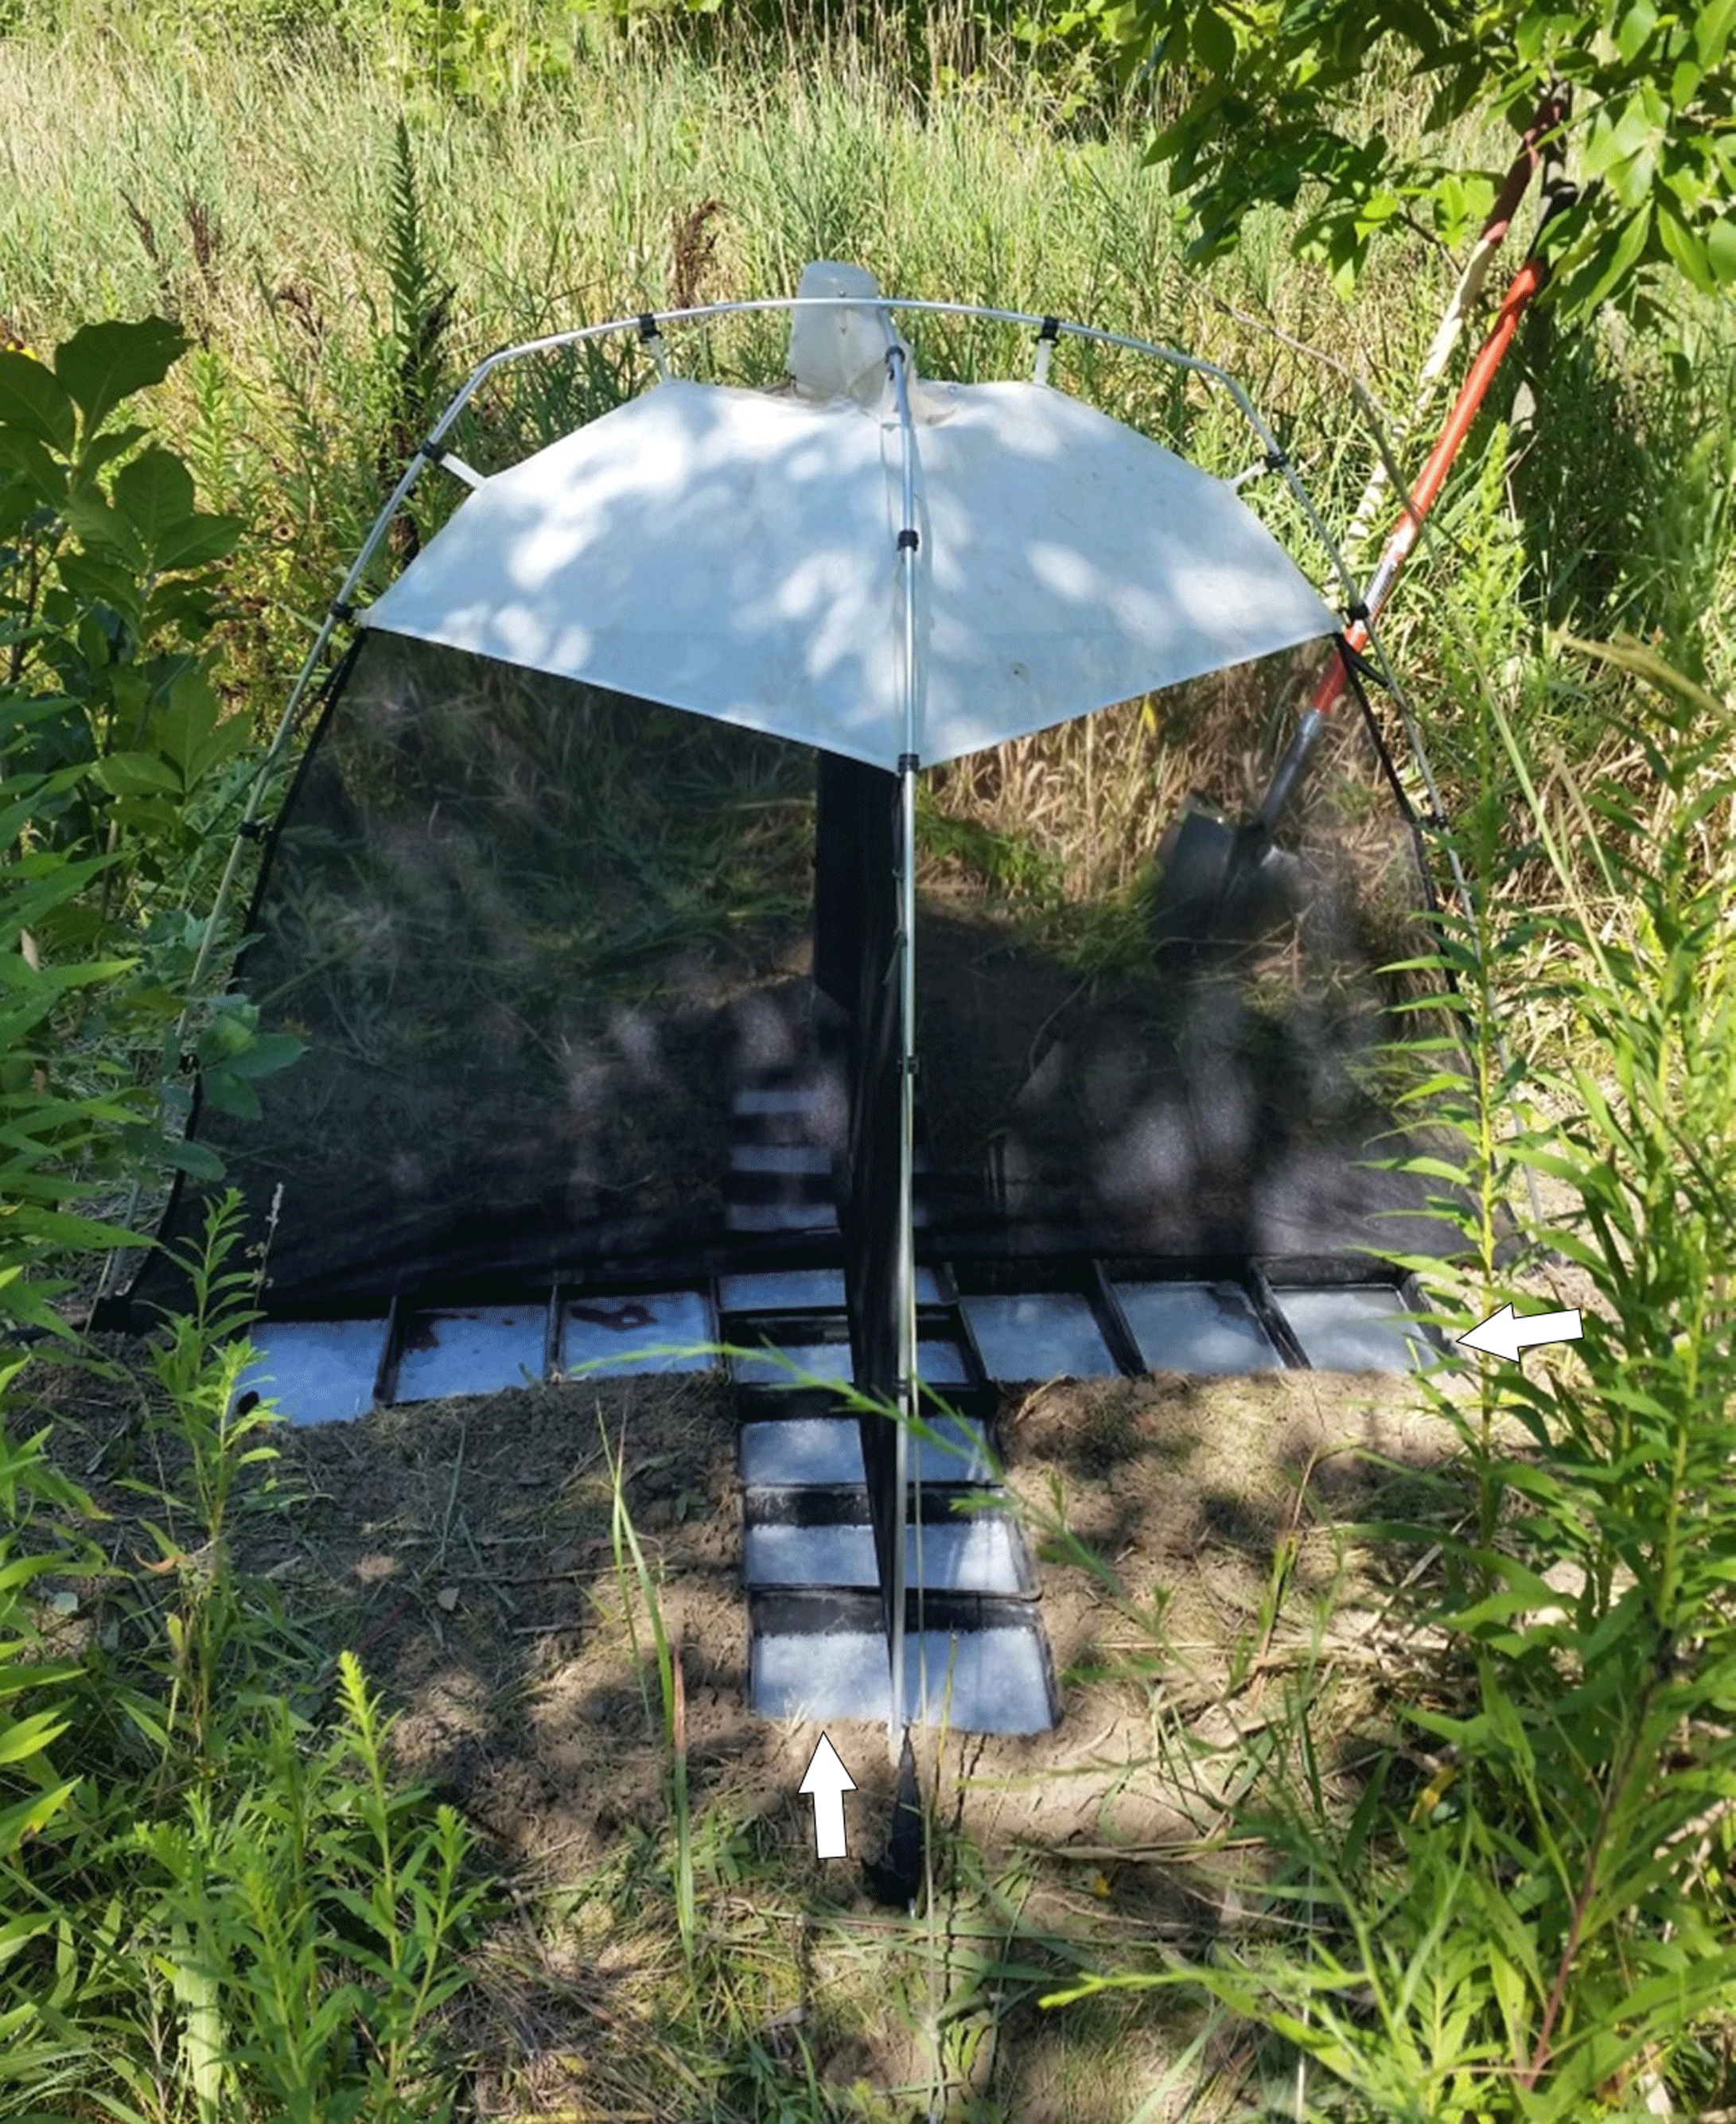 Pitfall-enhanced Malaise invertebrate trap deployed at Deetz Nature Preserve showing
                        ground-level collecting trays.